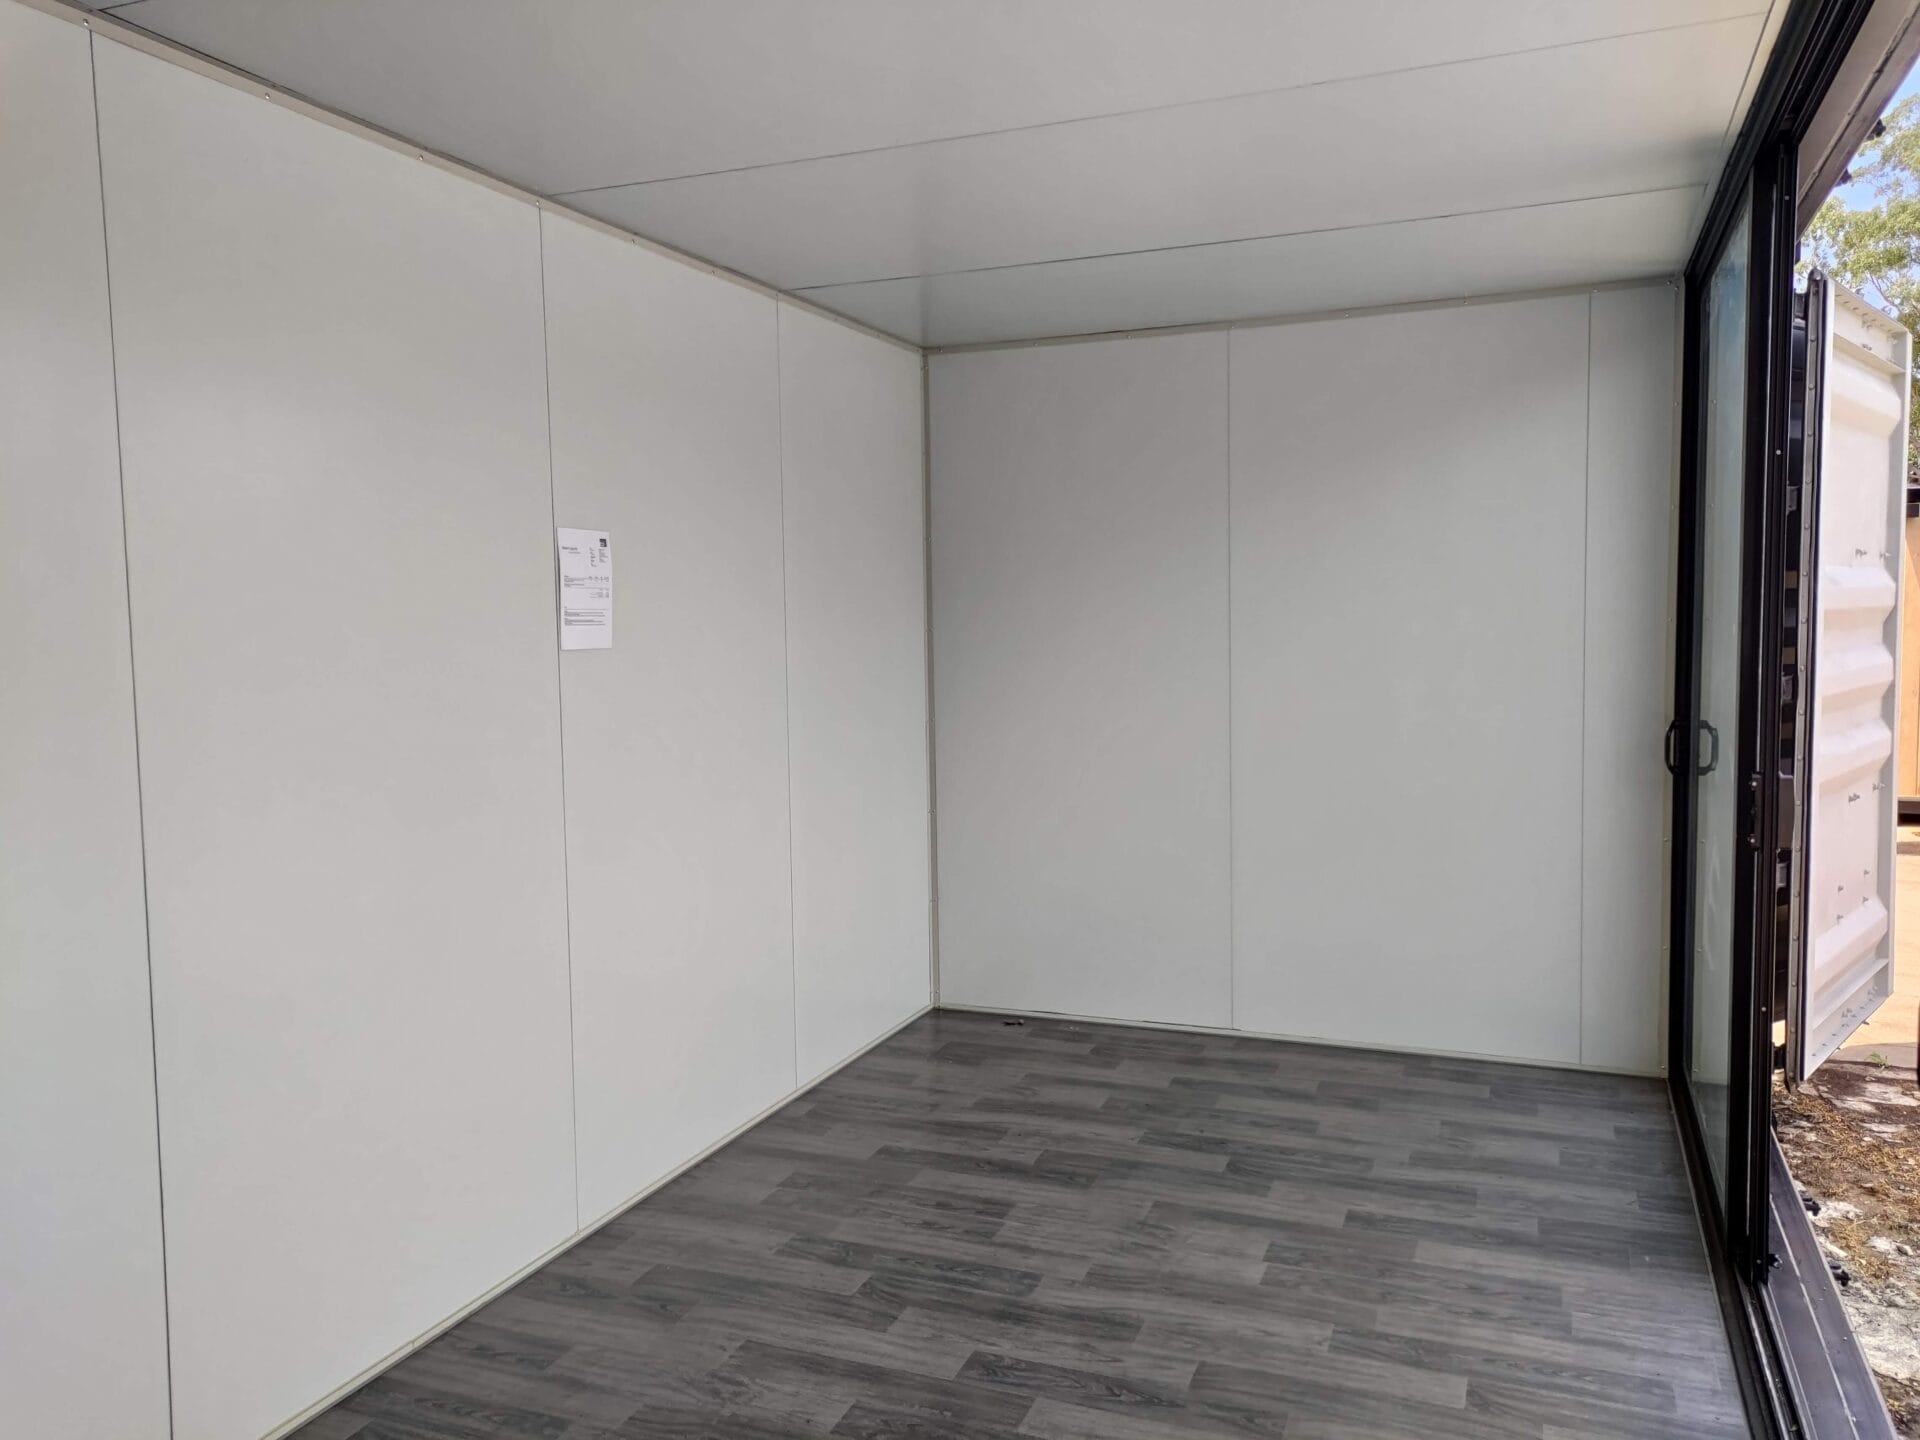 Site Office Sliding Doors Shipping Container Australia